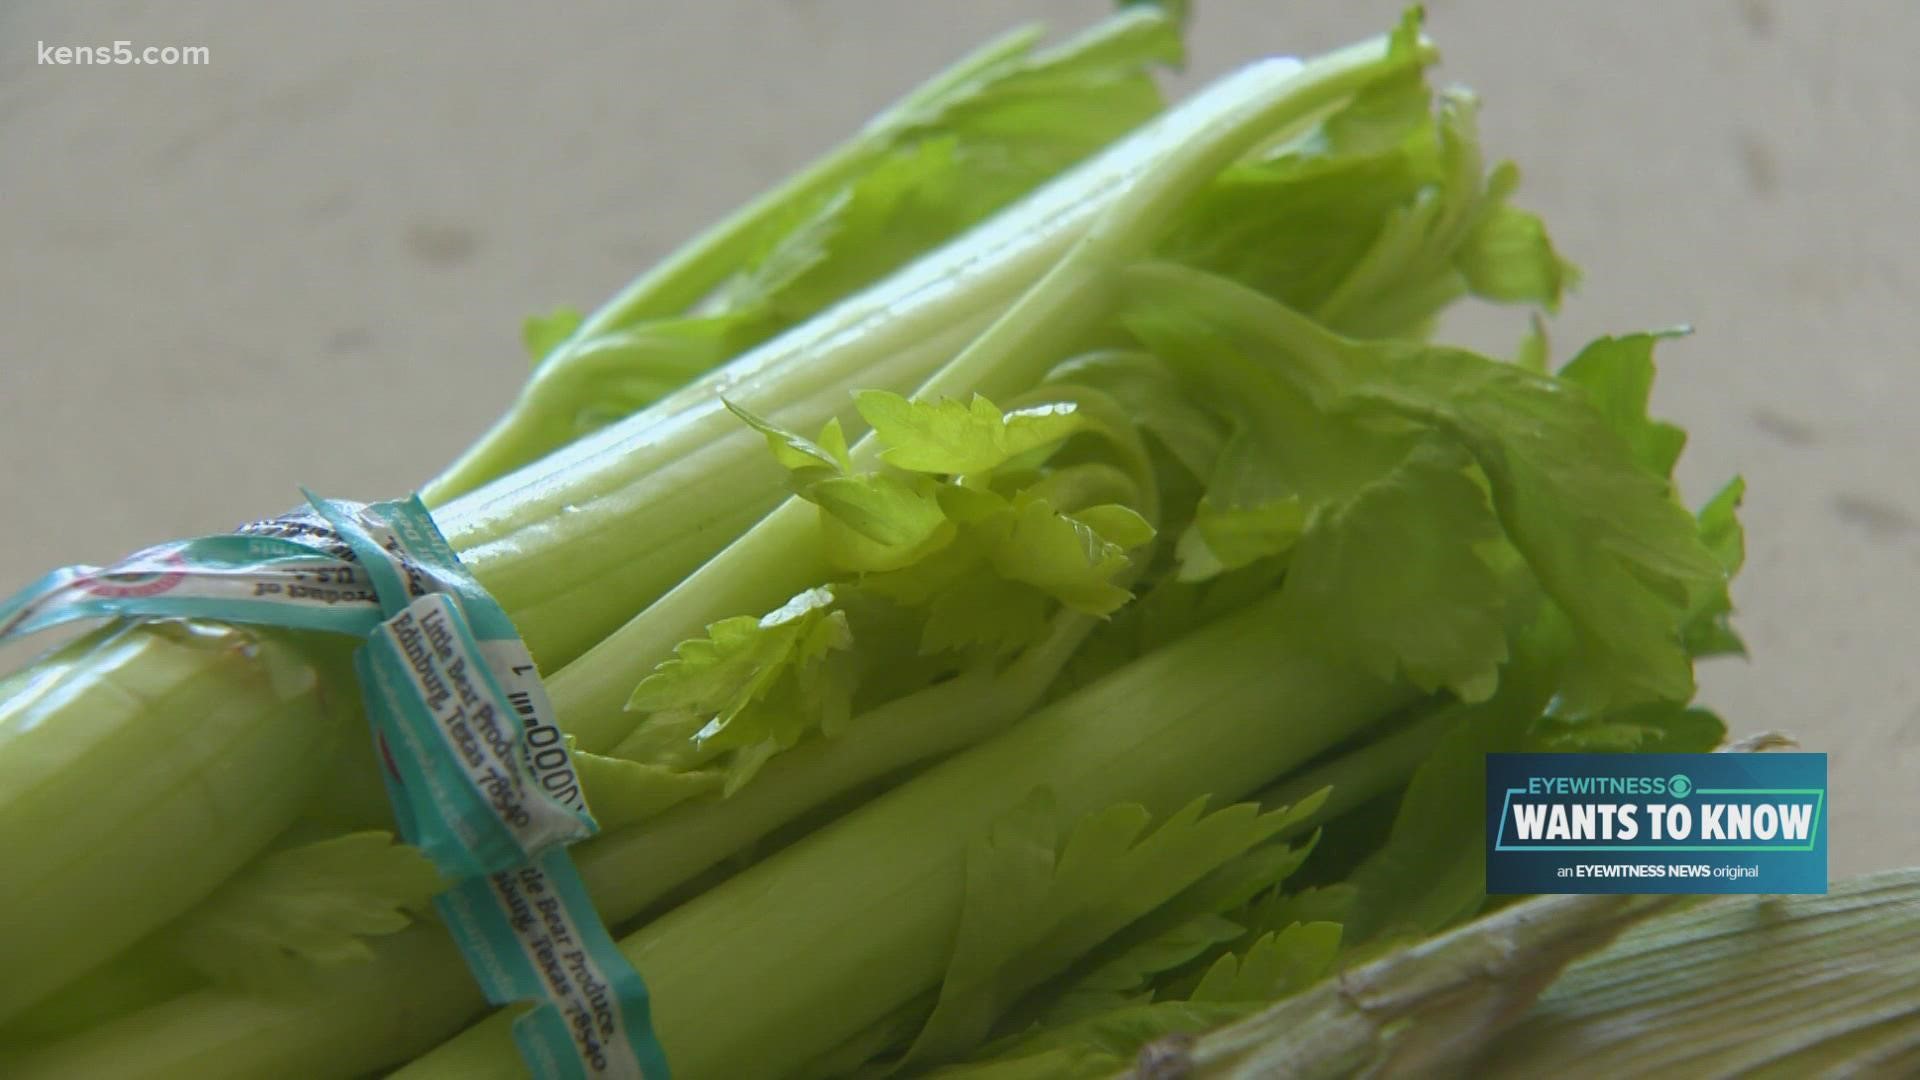 Reign in that high grocery bill. KENS 5 has easy ways to stretch your food budget.